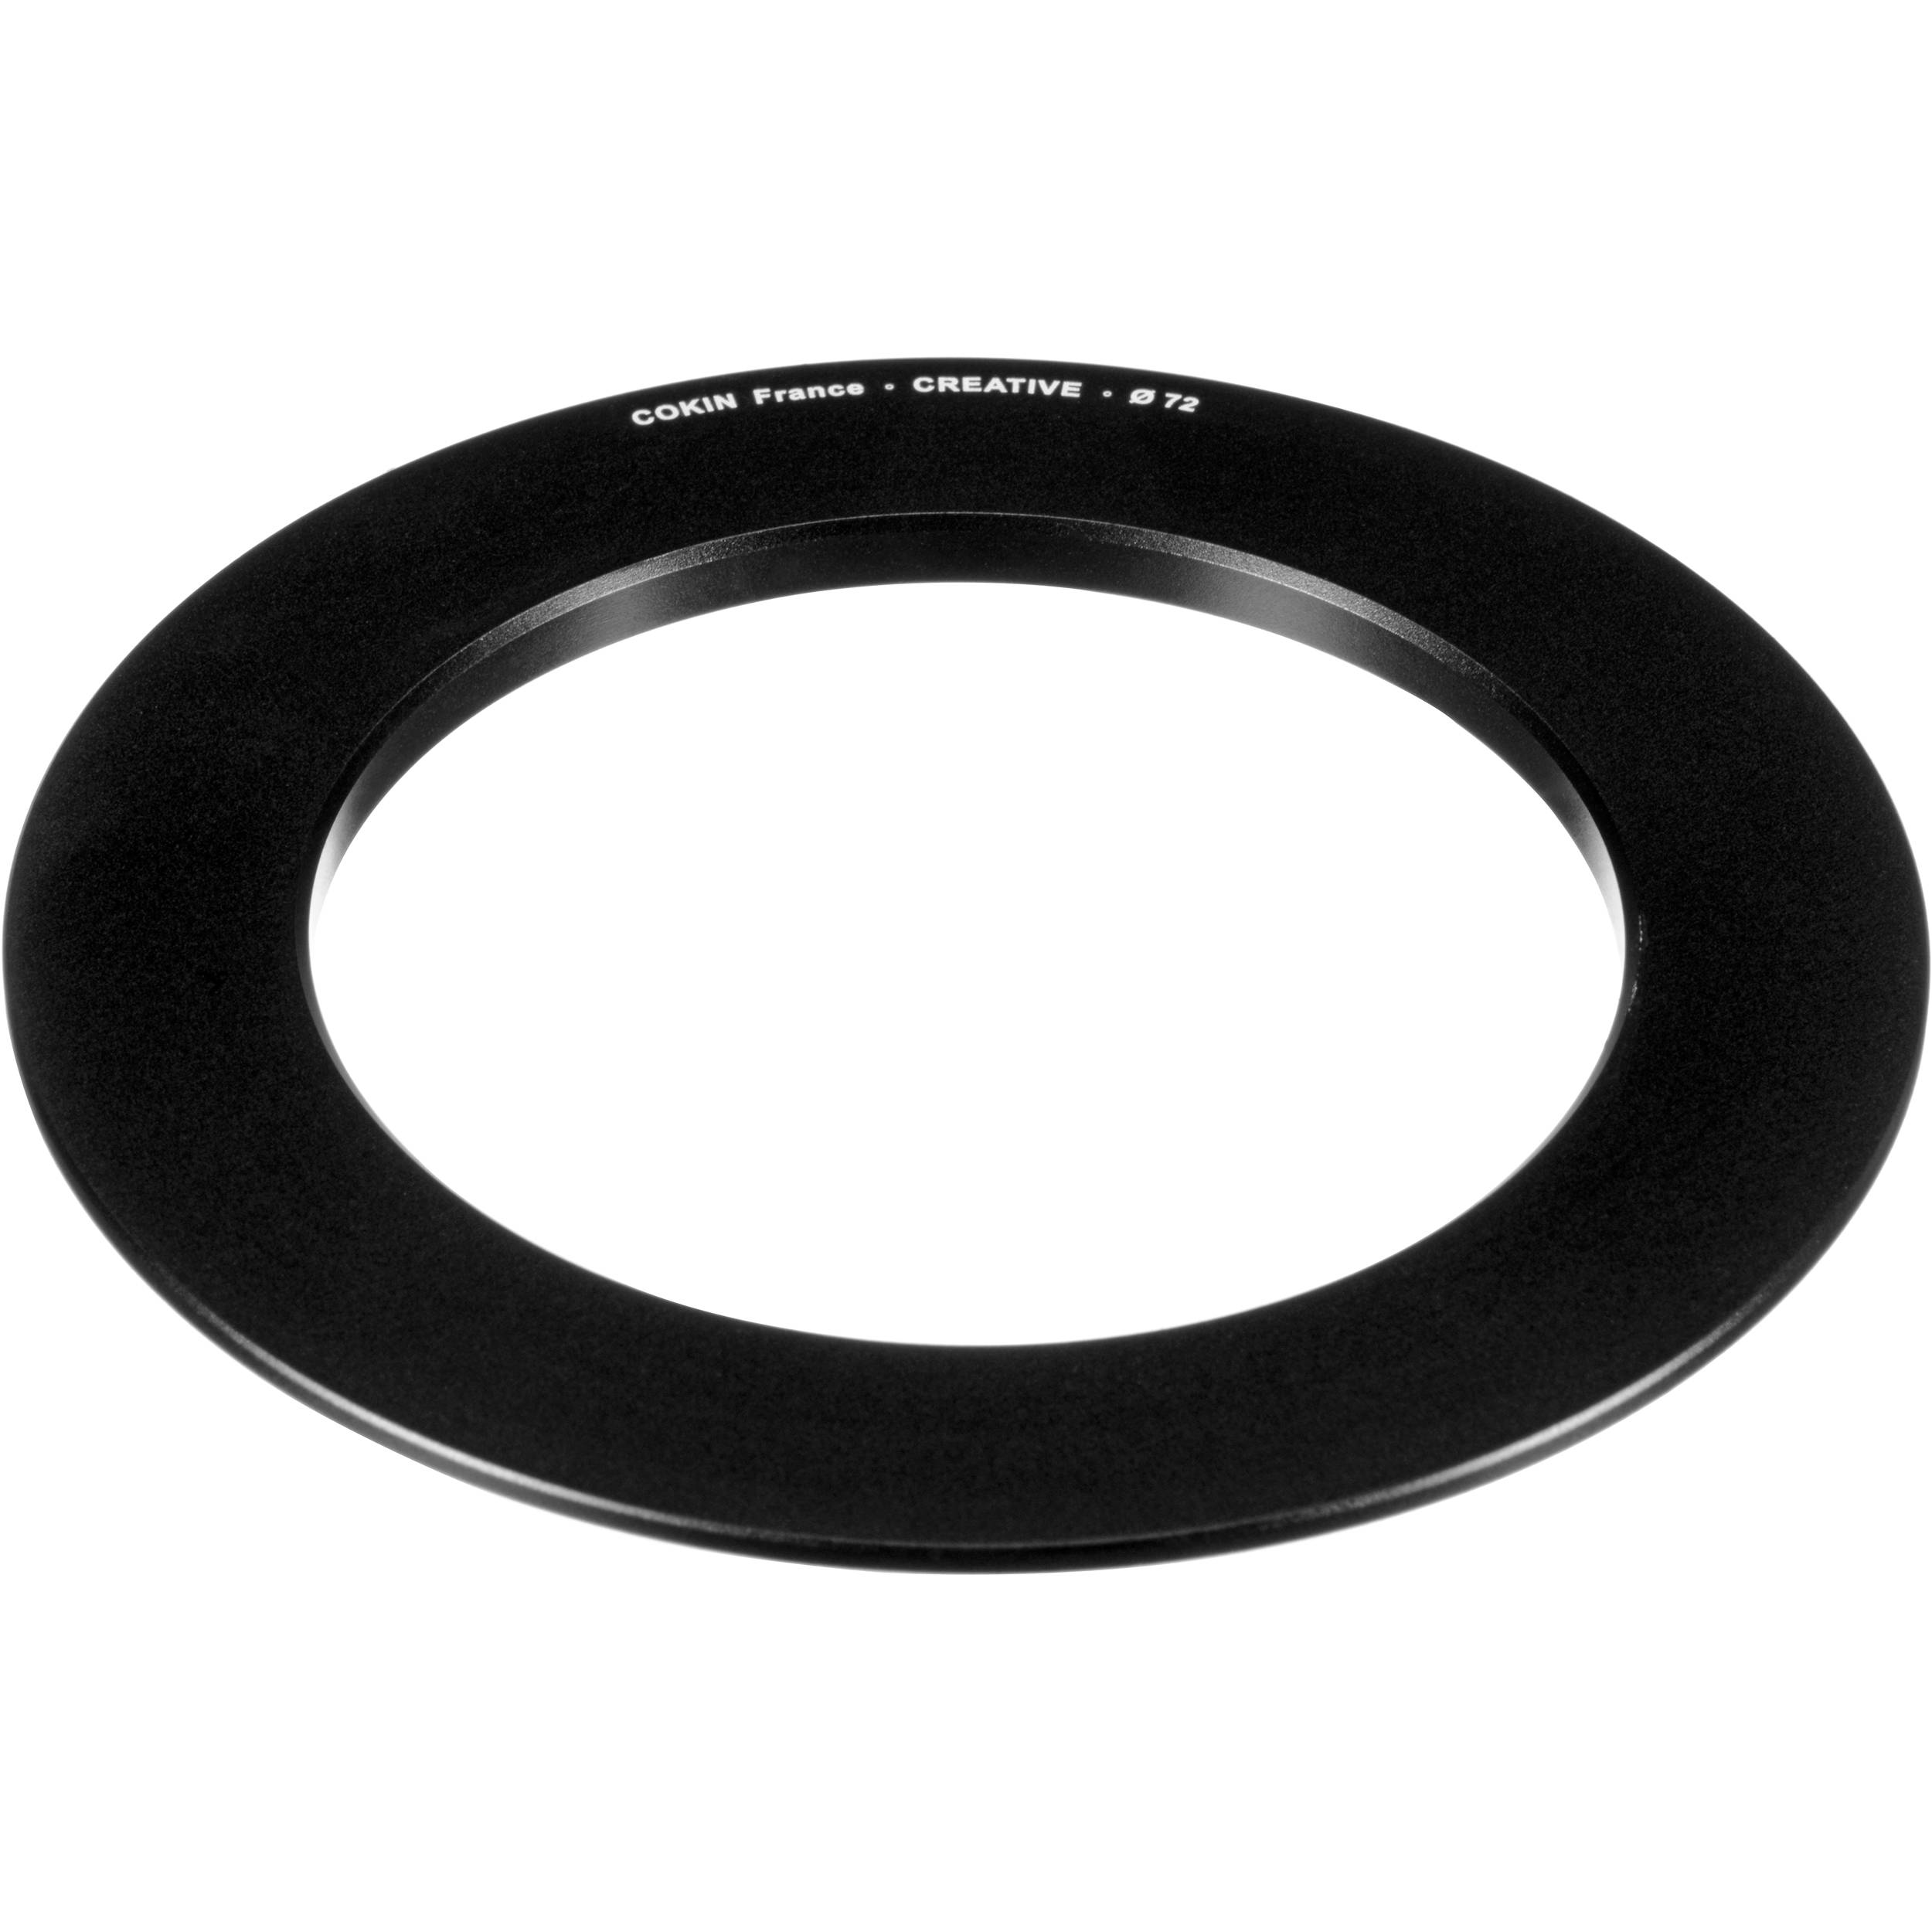 Cokin Z Pro Series Filter Holder Adapter Ring 72mm Cz472 B H Adaptor ring collection for cokin filters. b h